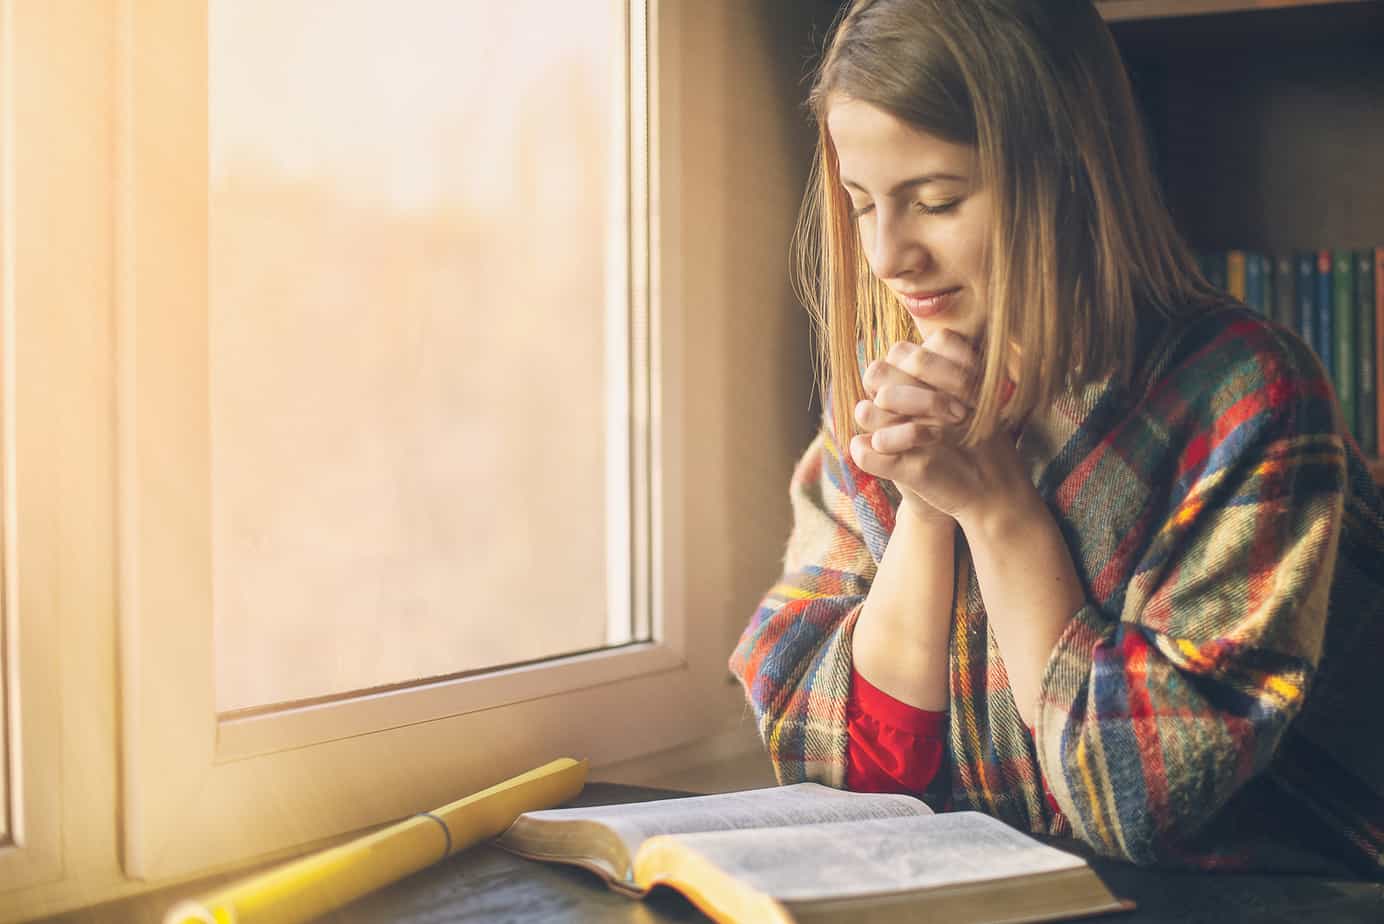 prayers for husband - young woman prayers near window with golden light streaming through, open bible in front of her